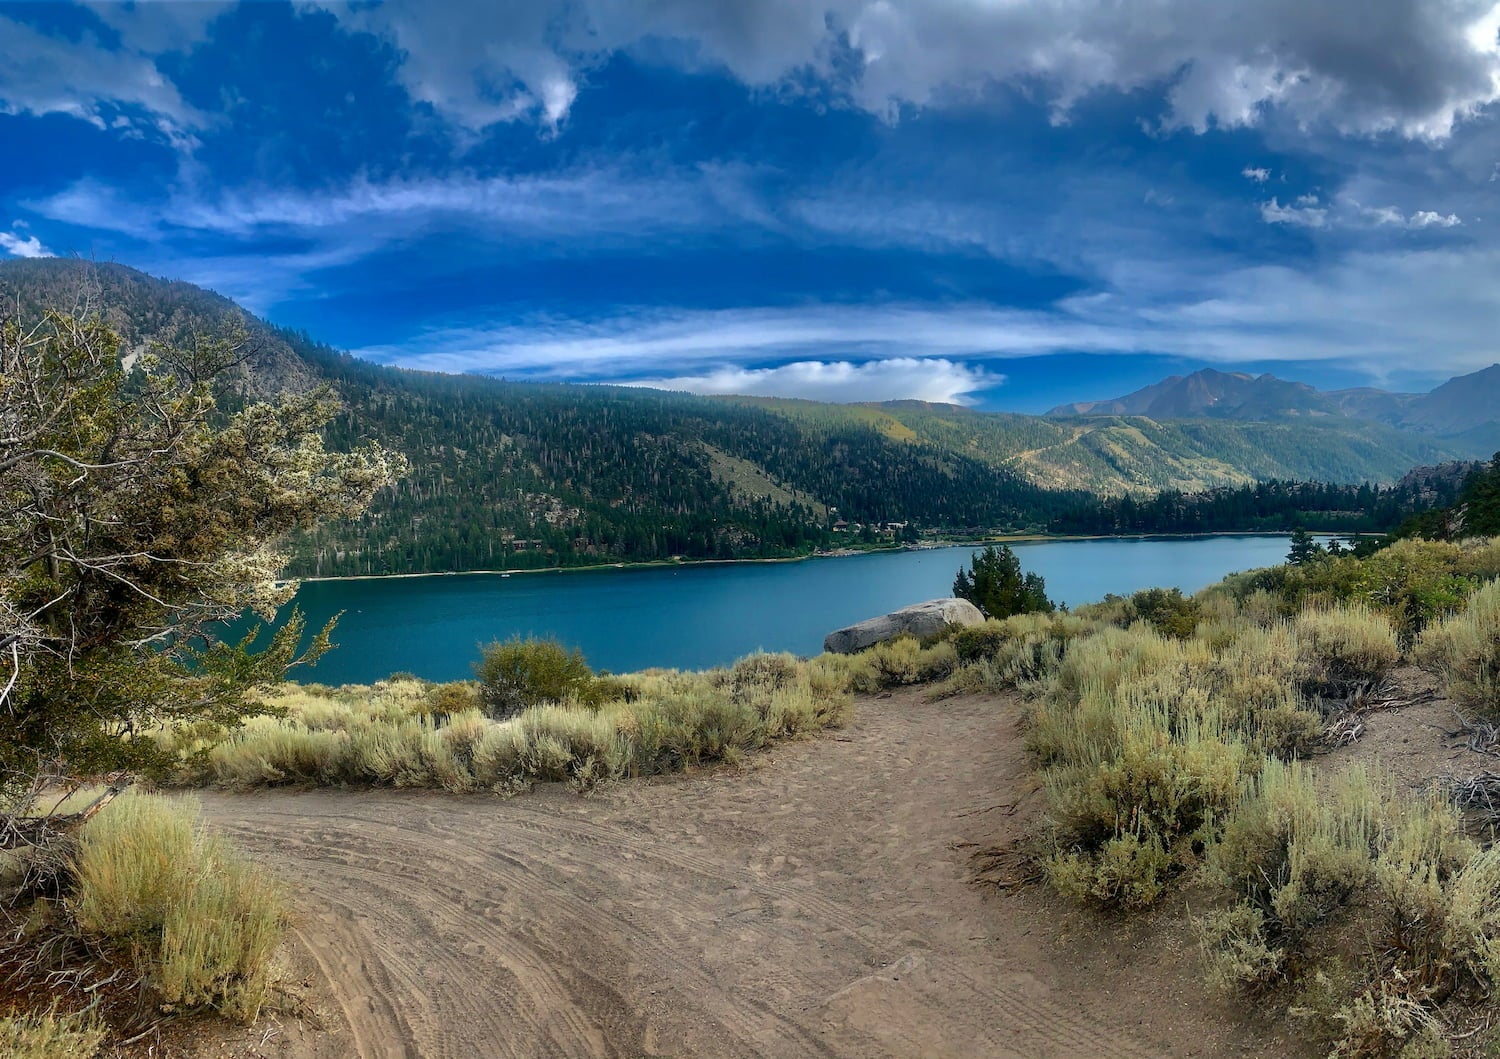 road and lake during cloudy storm